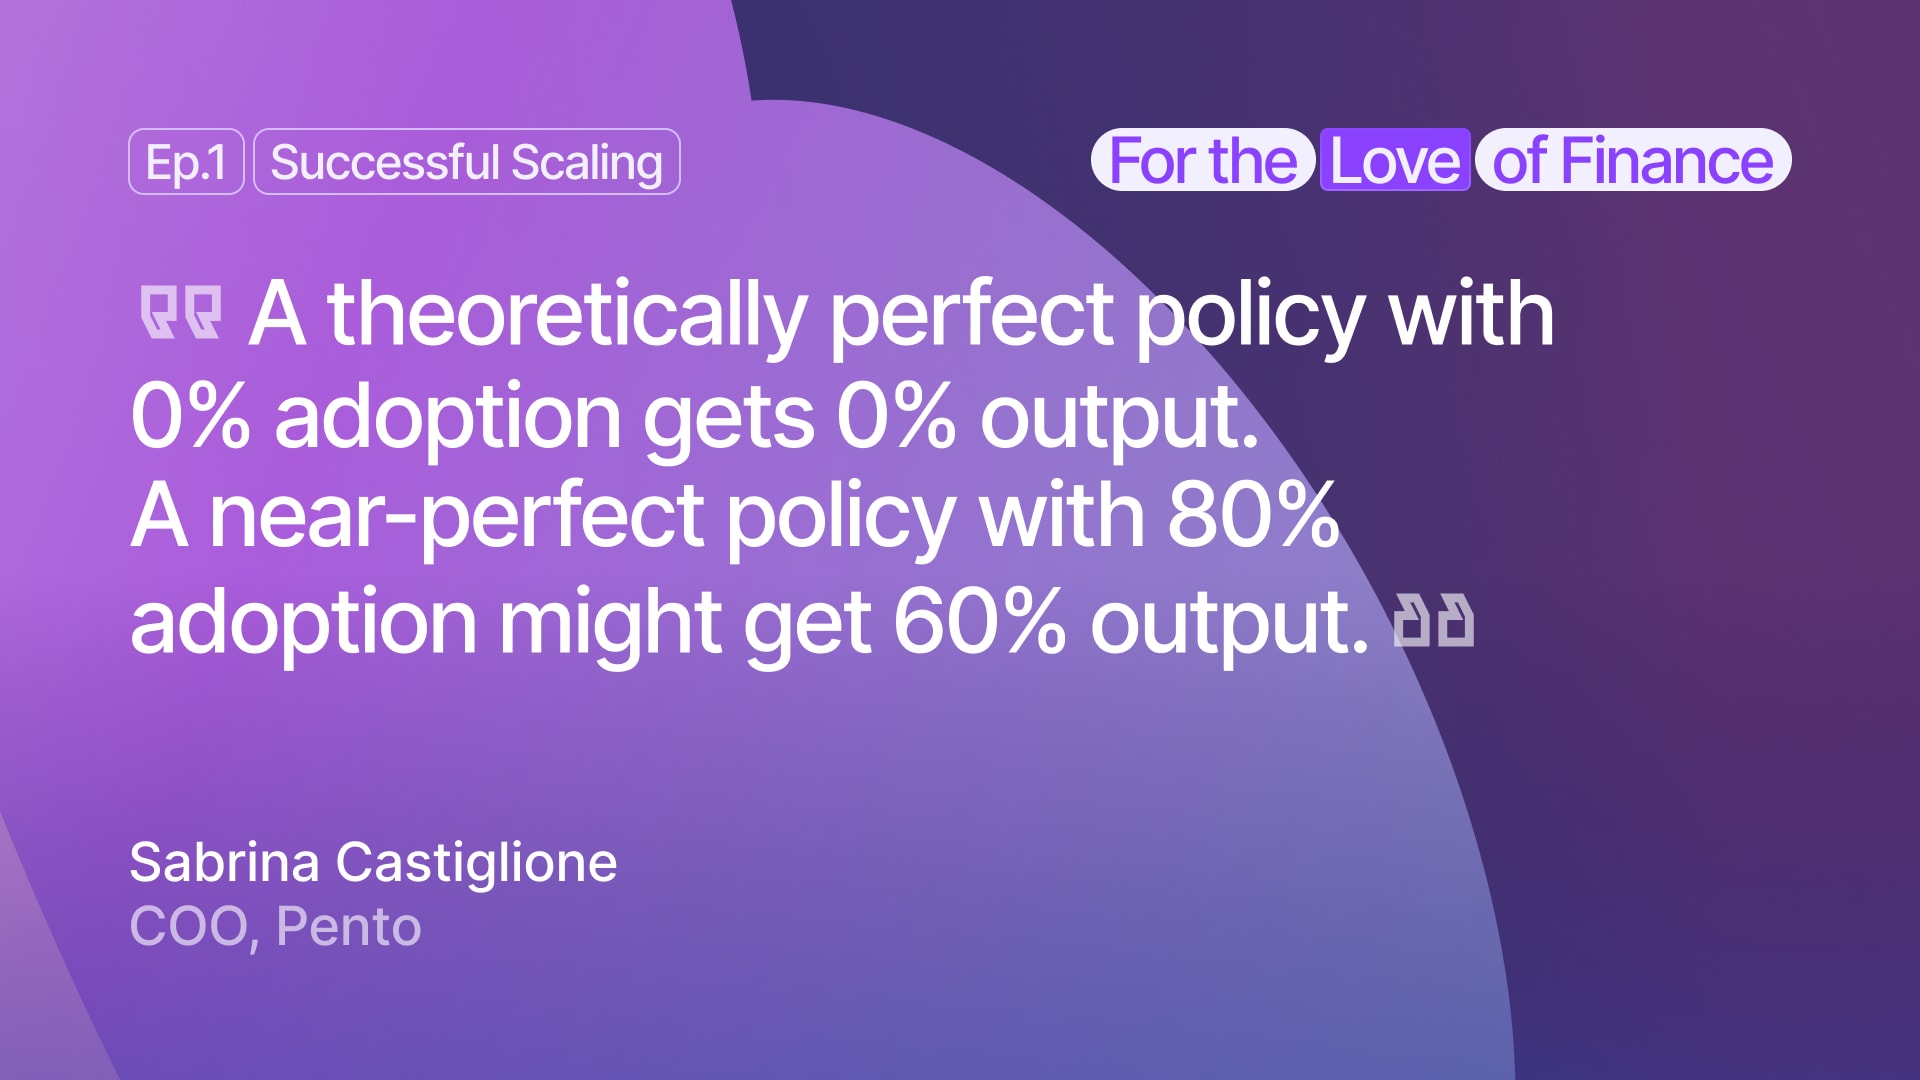 A theoretically perfect policy with 0% adoption gets 0% output, but a near-perfect policy with 80% adoption might get 60% output.